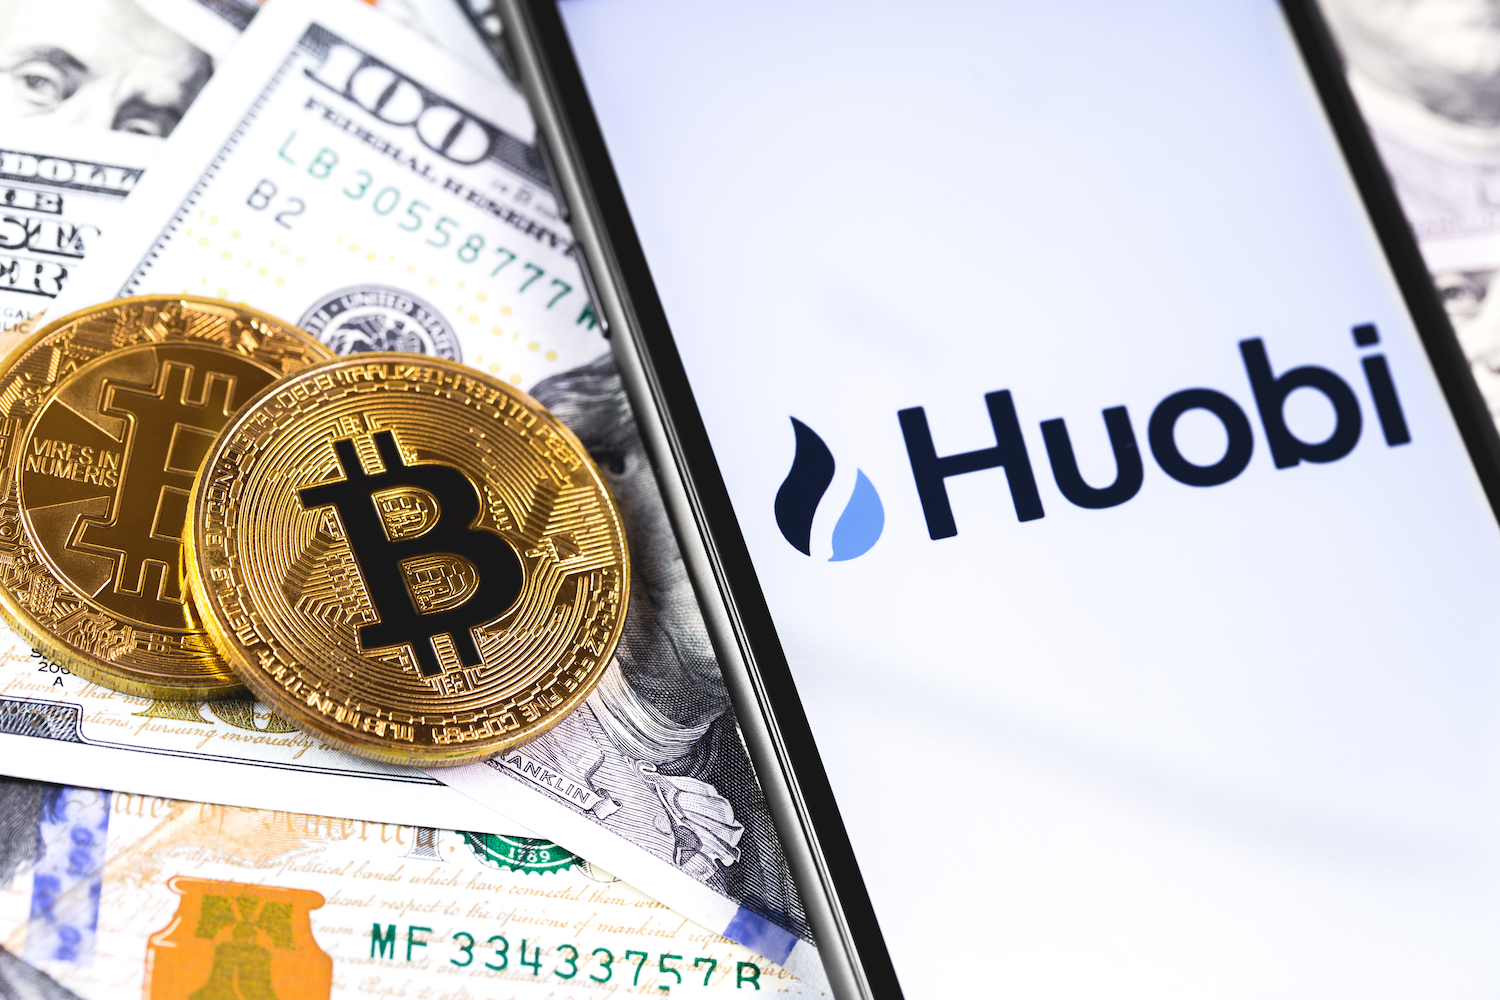 Huobi Japan Raises $4.6 Million From Tokyo-Listed Financial Services Firm